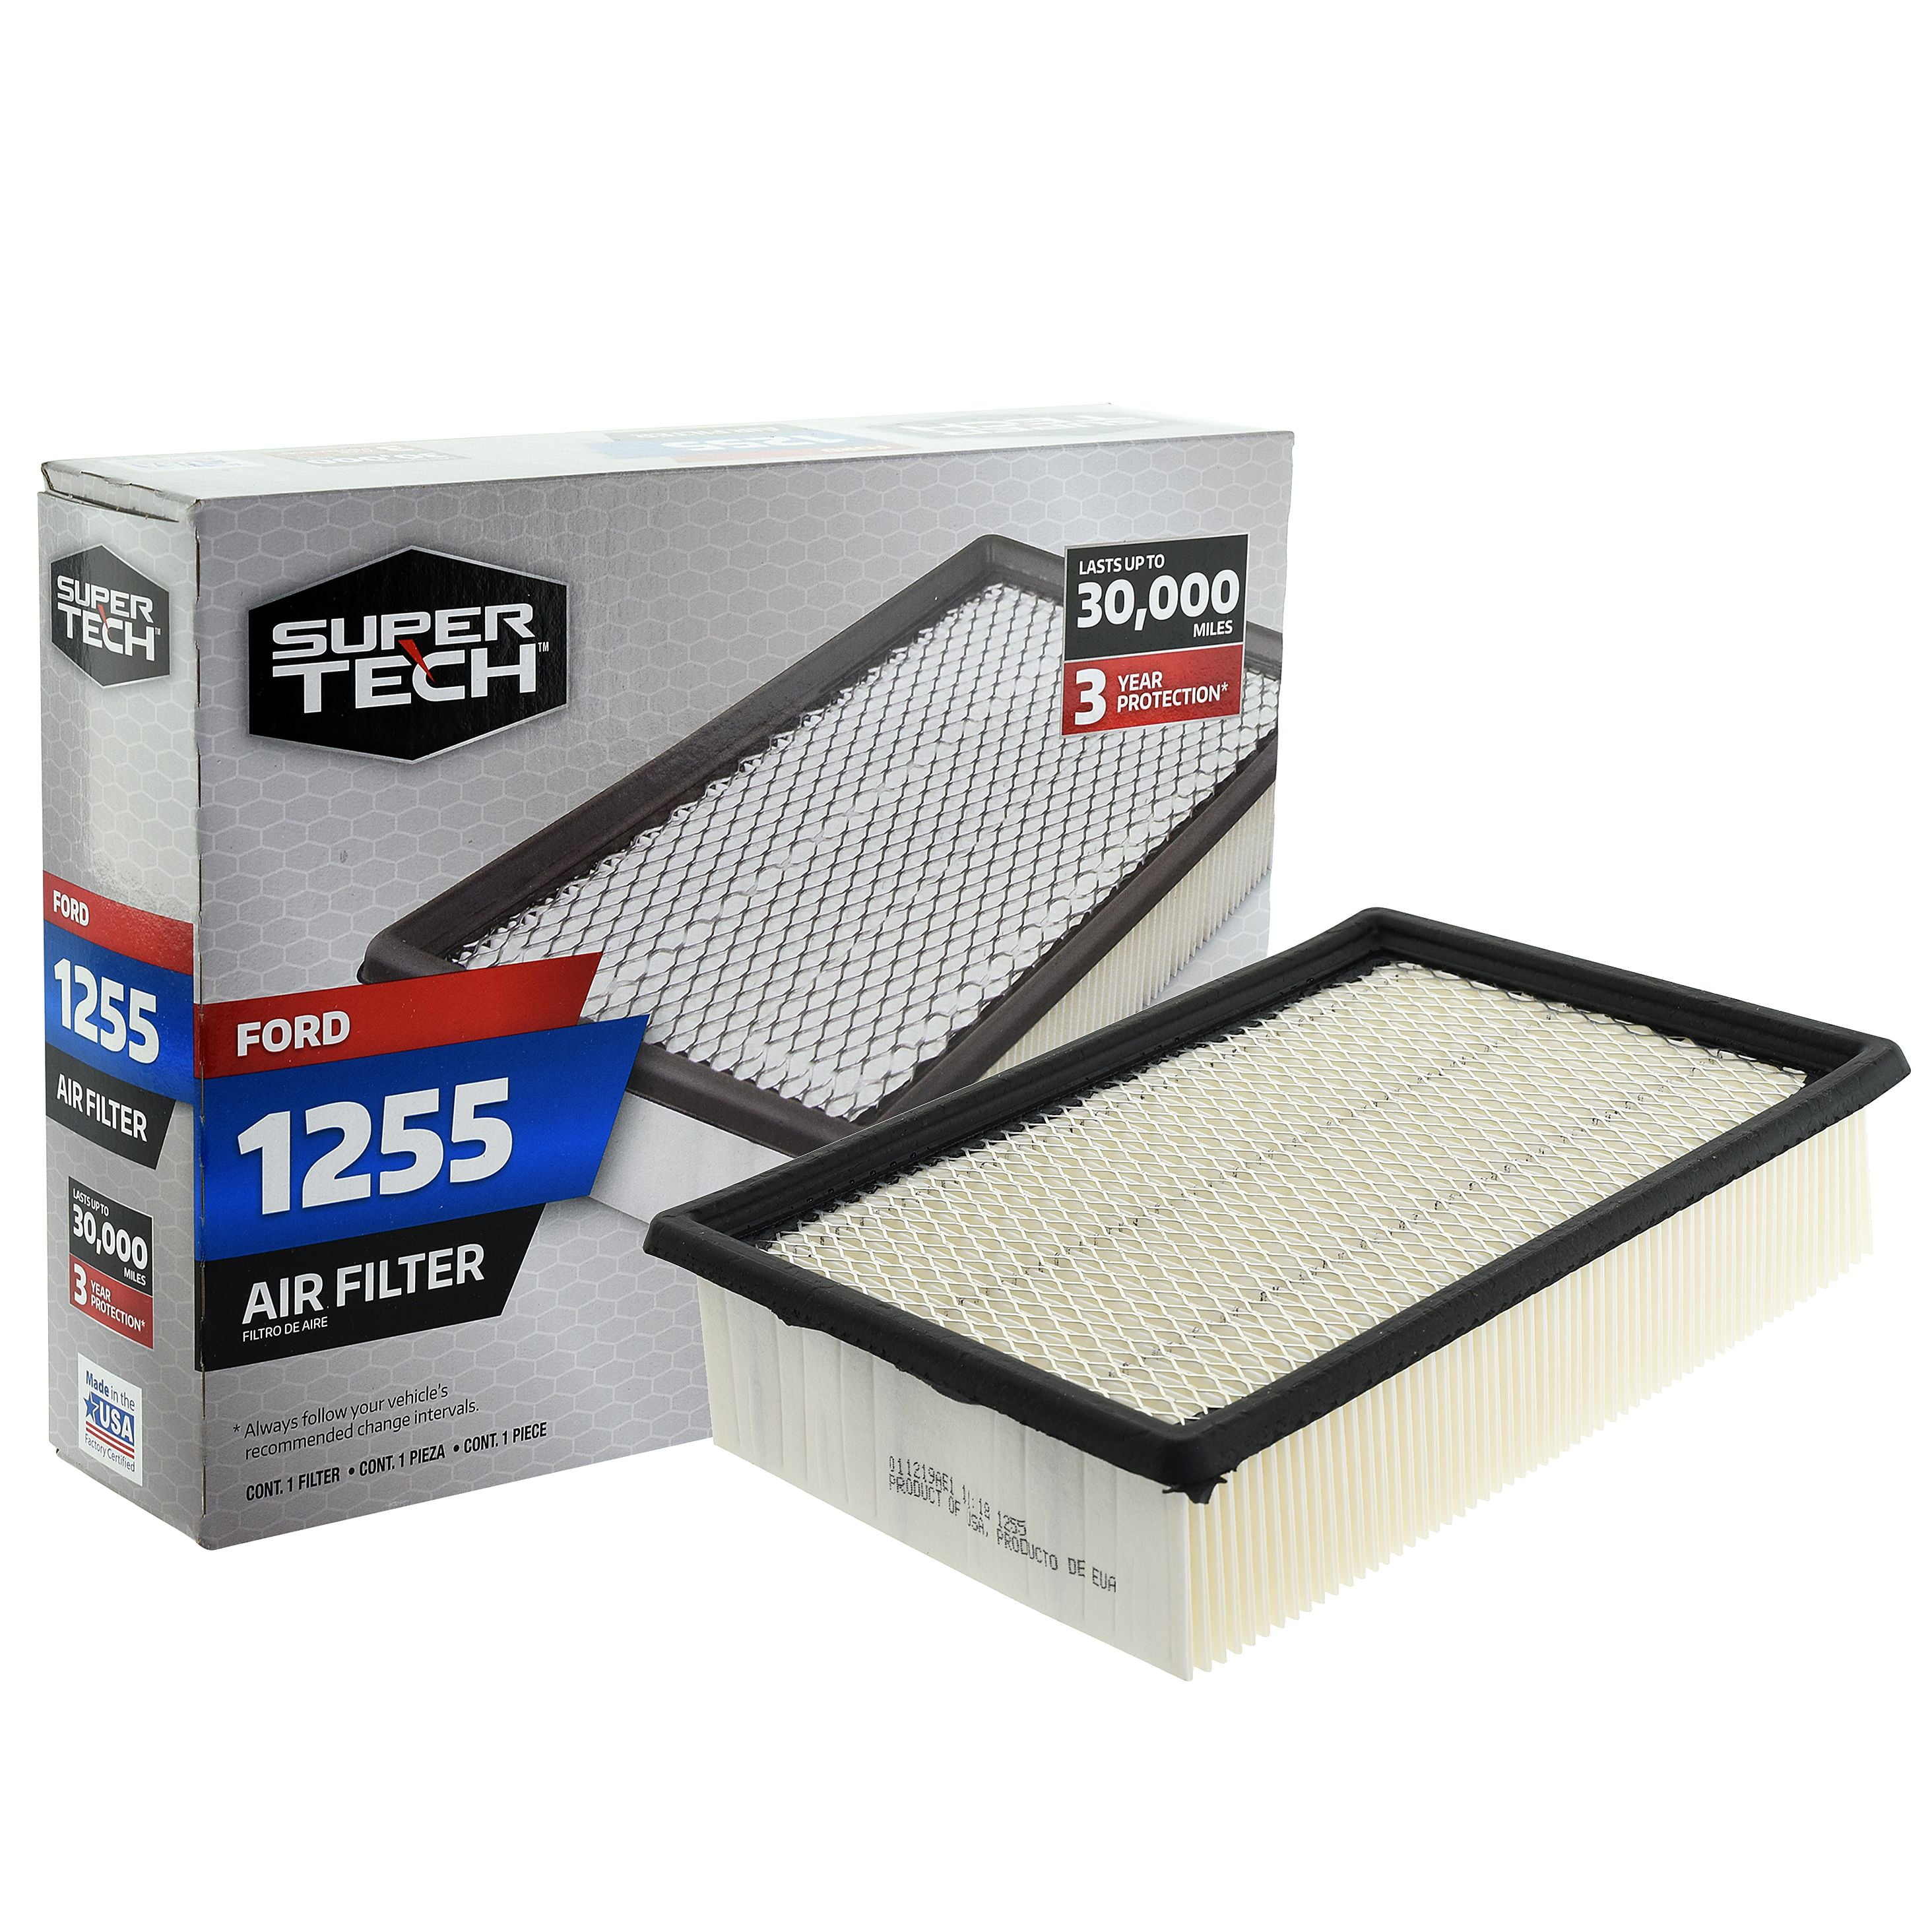 SuperTech Engine Air Filter 1255, Replacement Filter for Ford